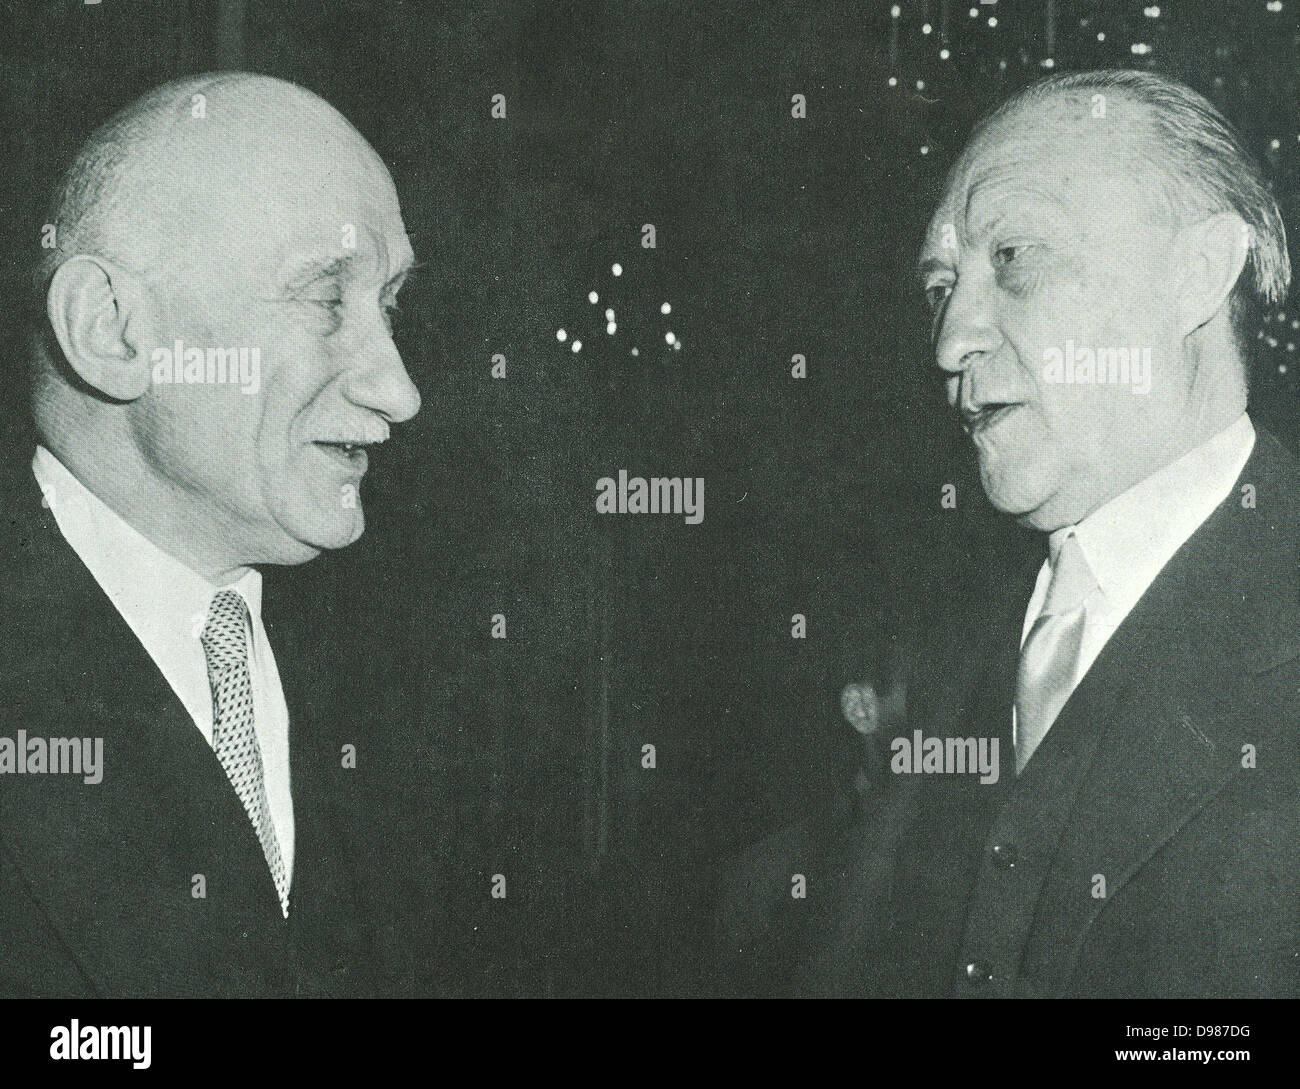 Konrad Adenauer (1876-1967), German Chancellor, right, and Robert Schuman (1886-1863), French Foreign Minister meeting, 27 May 1952. Stock Photo